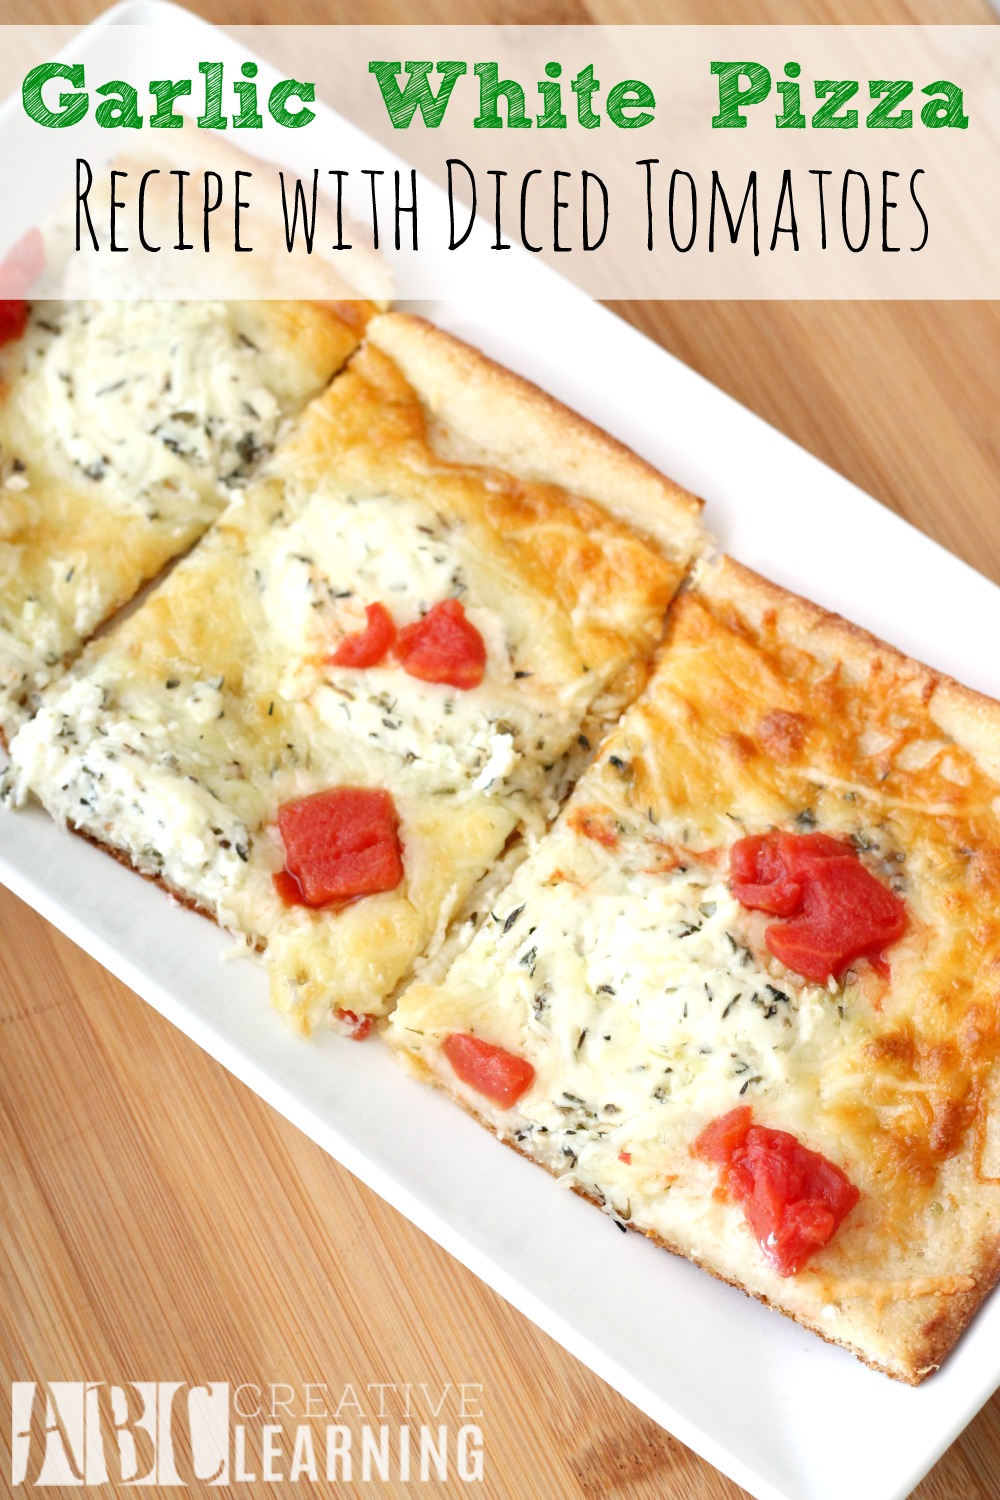 Garlic White Pizza Recipe with Diced Tomatoes + Paypal Giveaway